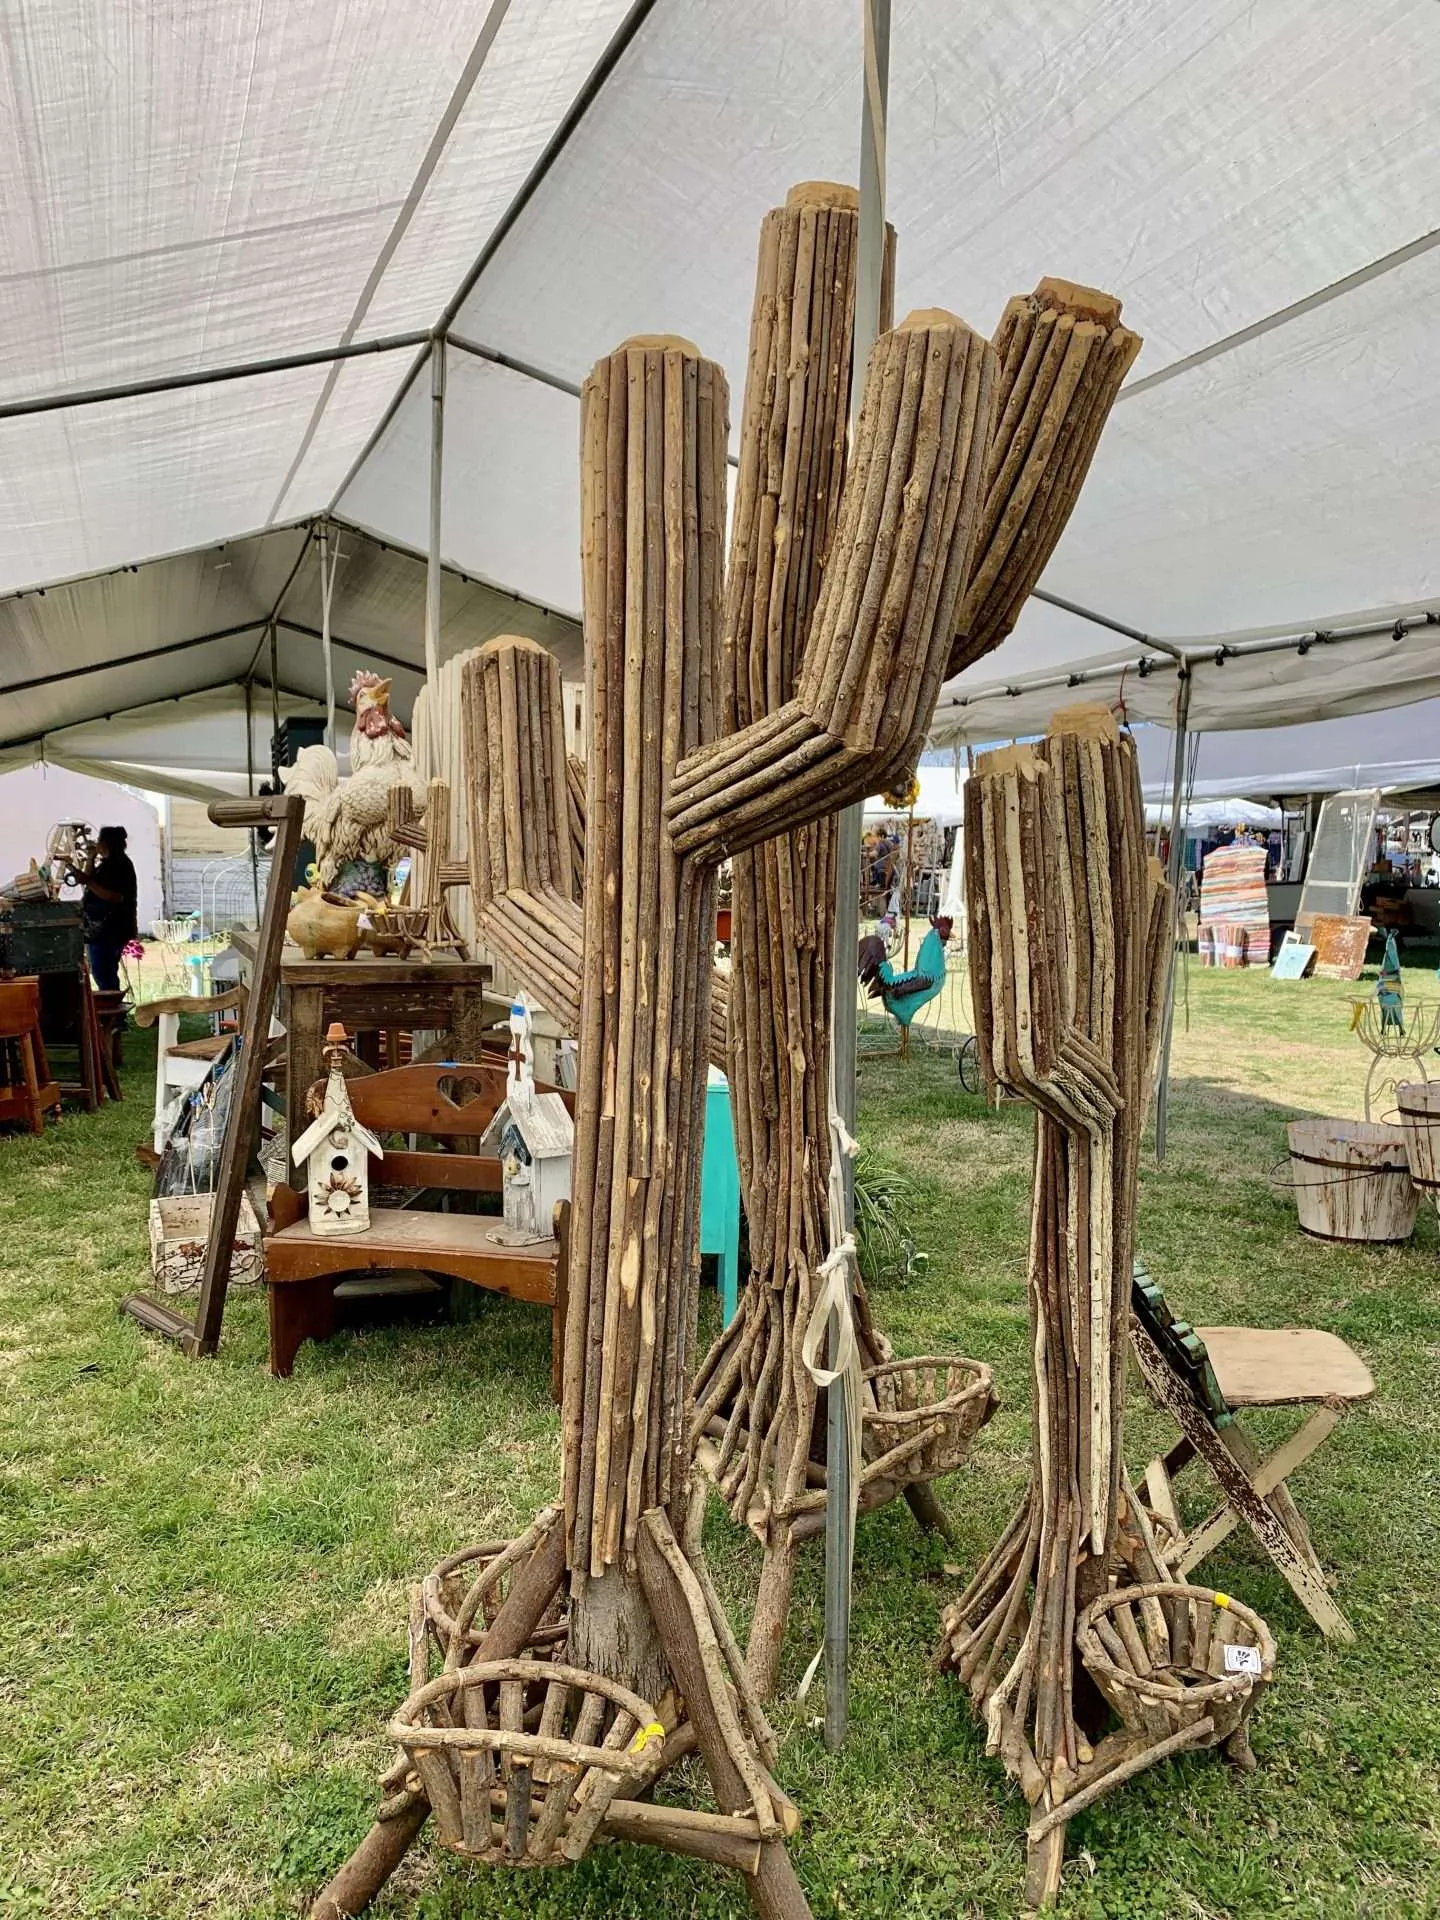 Wooden cacti for sale at the fields in Warrenton, TX during the Round Top Antique Show.